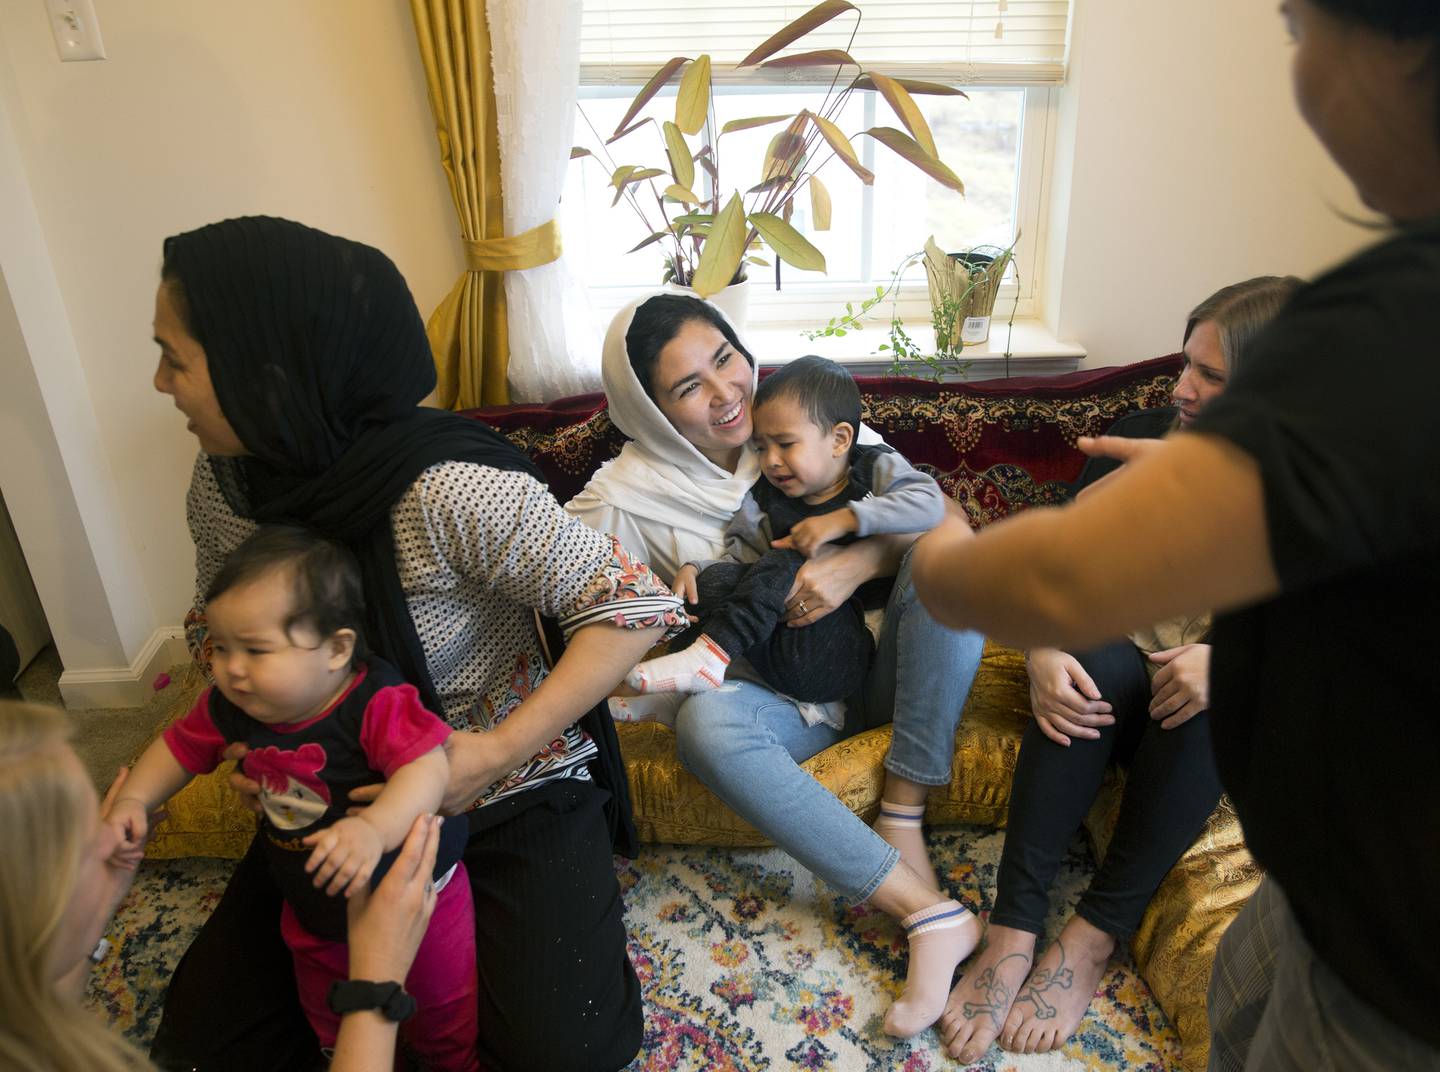 Sima Gul, center, holds her son, Amir Mazlom Yar, as Azizgul Ahmadi, right, reaches for him during a gathering at her home, welcoming Gul to Blacksburg, Va., on Dec.9, 2022.